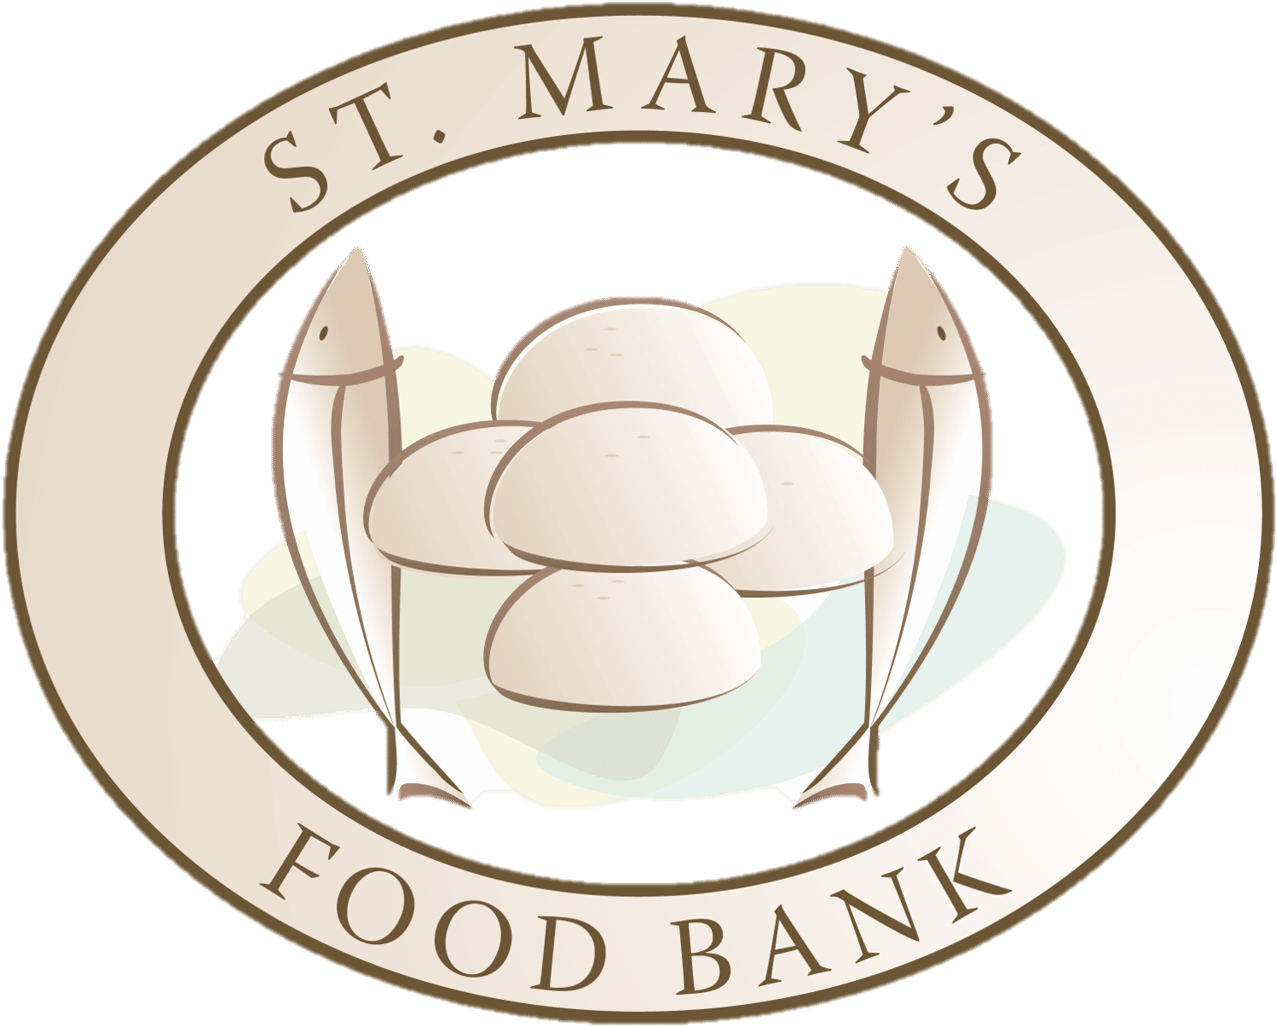 St Mary's Food Bank Mississauga